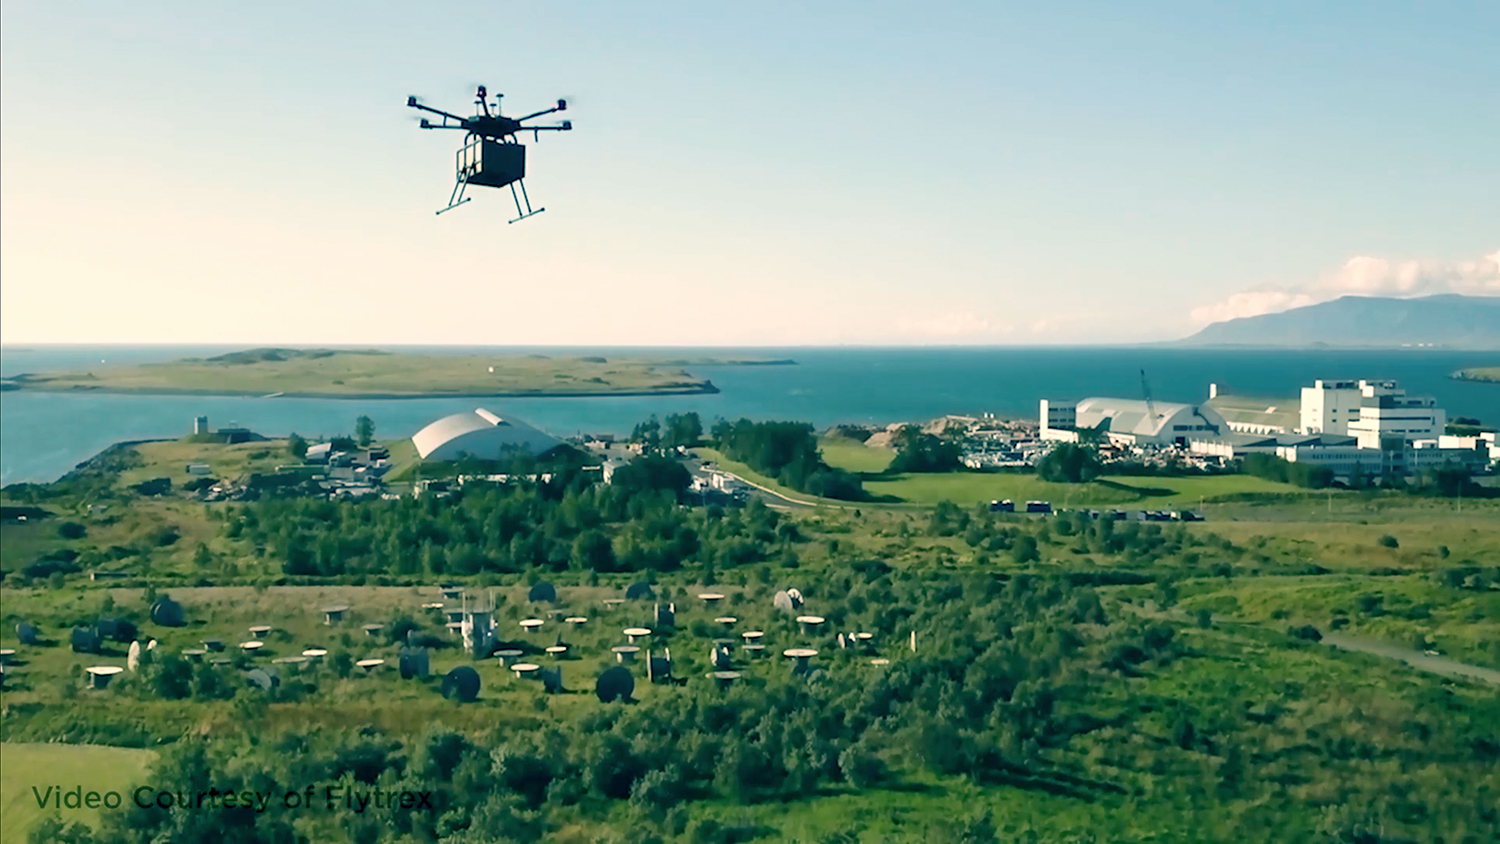 A drone flies over the skyline with a package